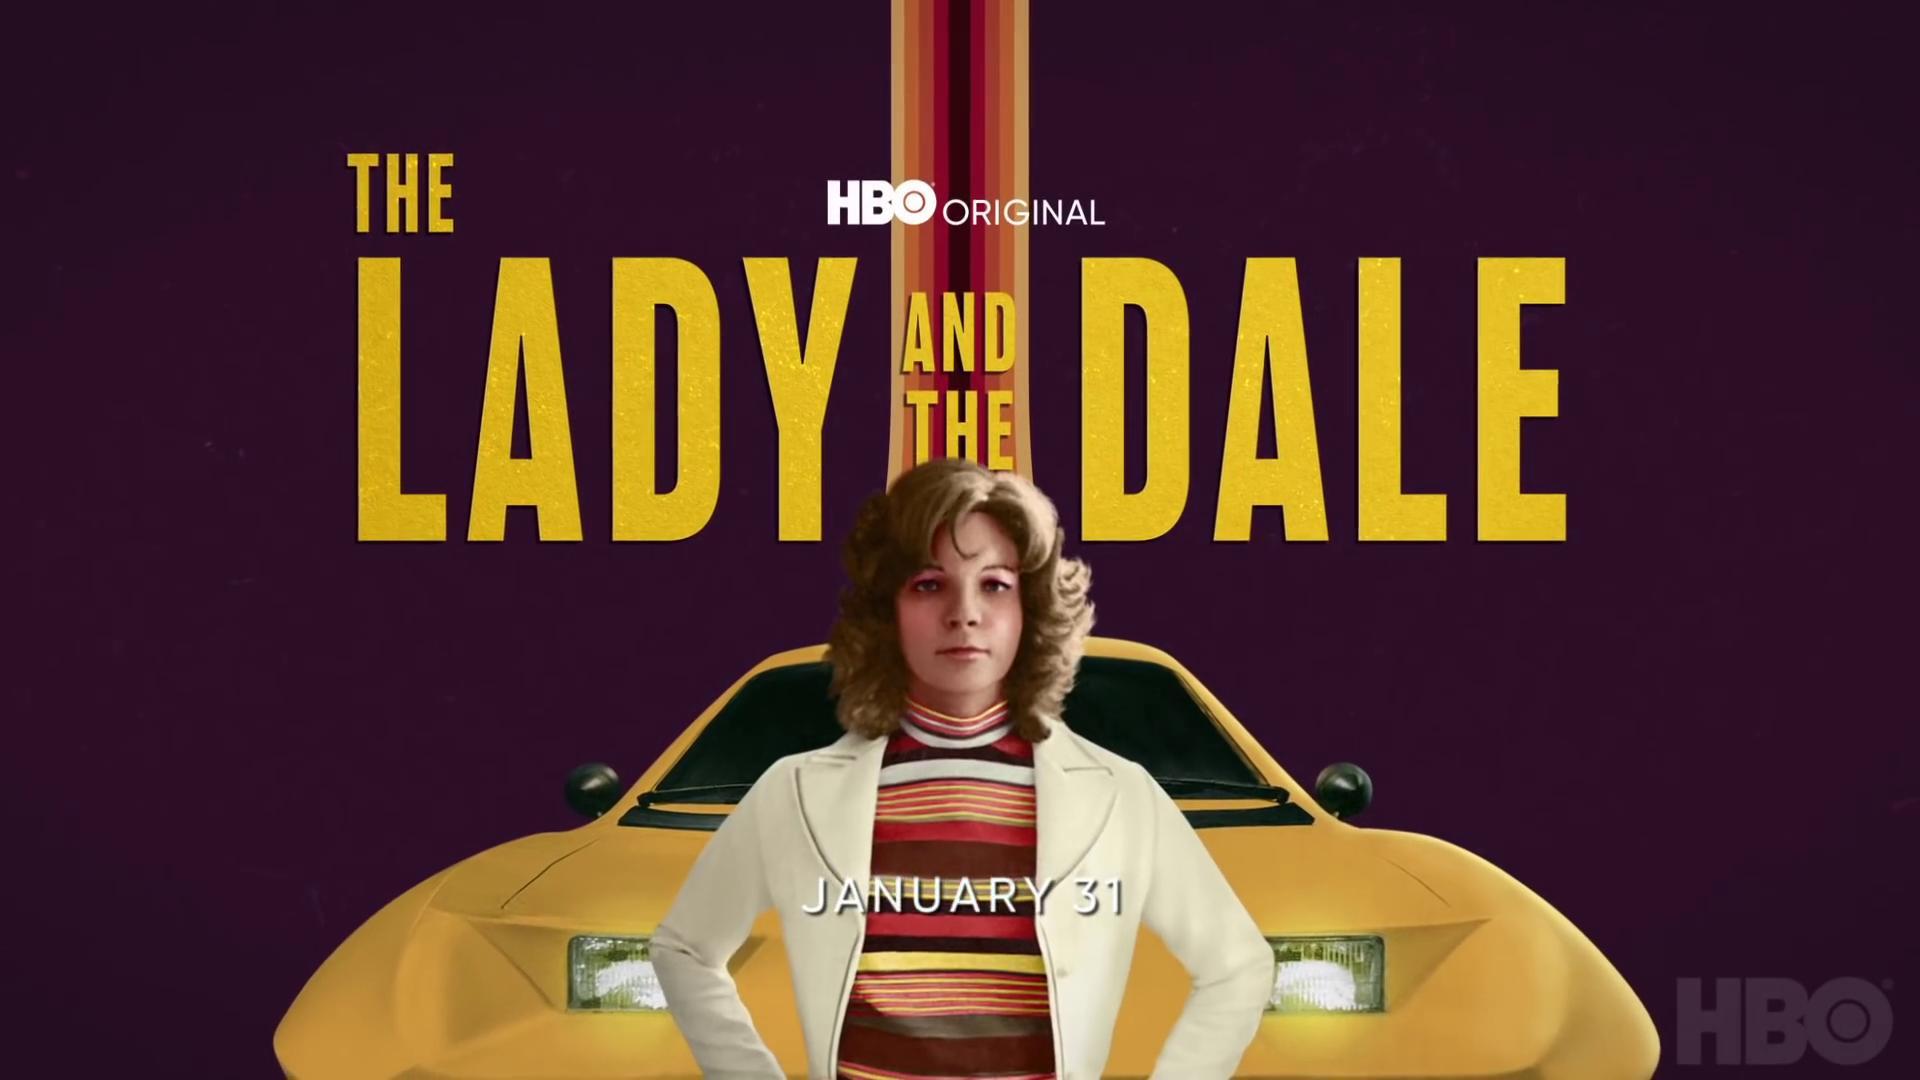 The lady and the dale season 2